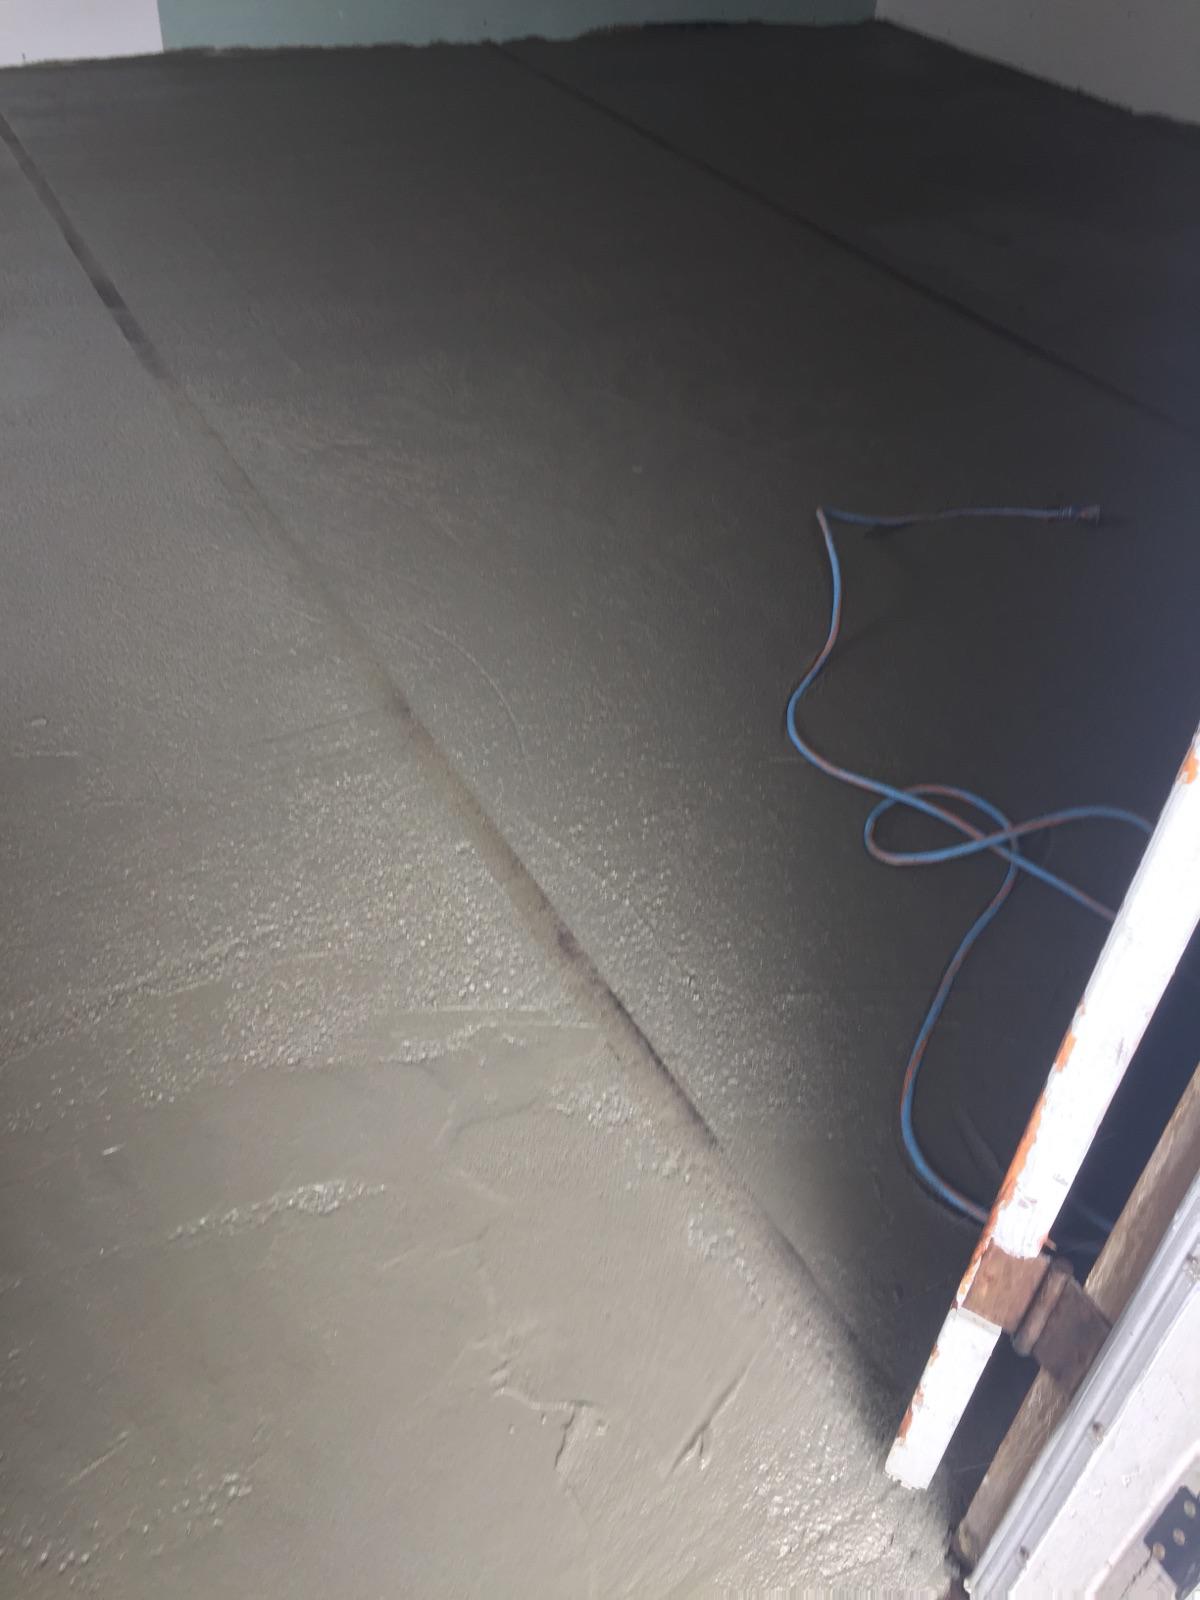 A wire is laying on the floor of an unfinished room.